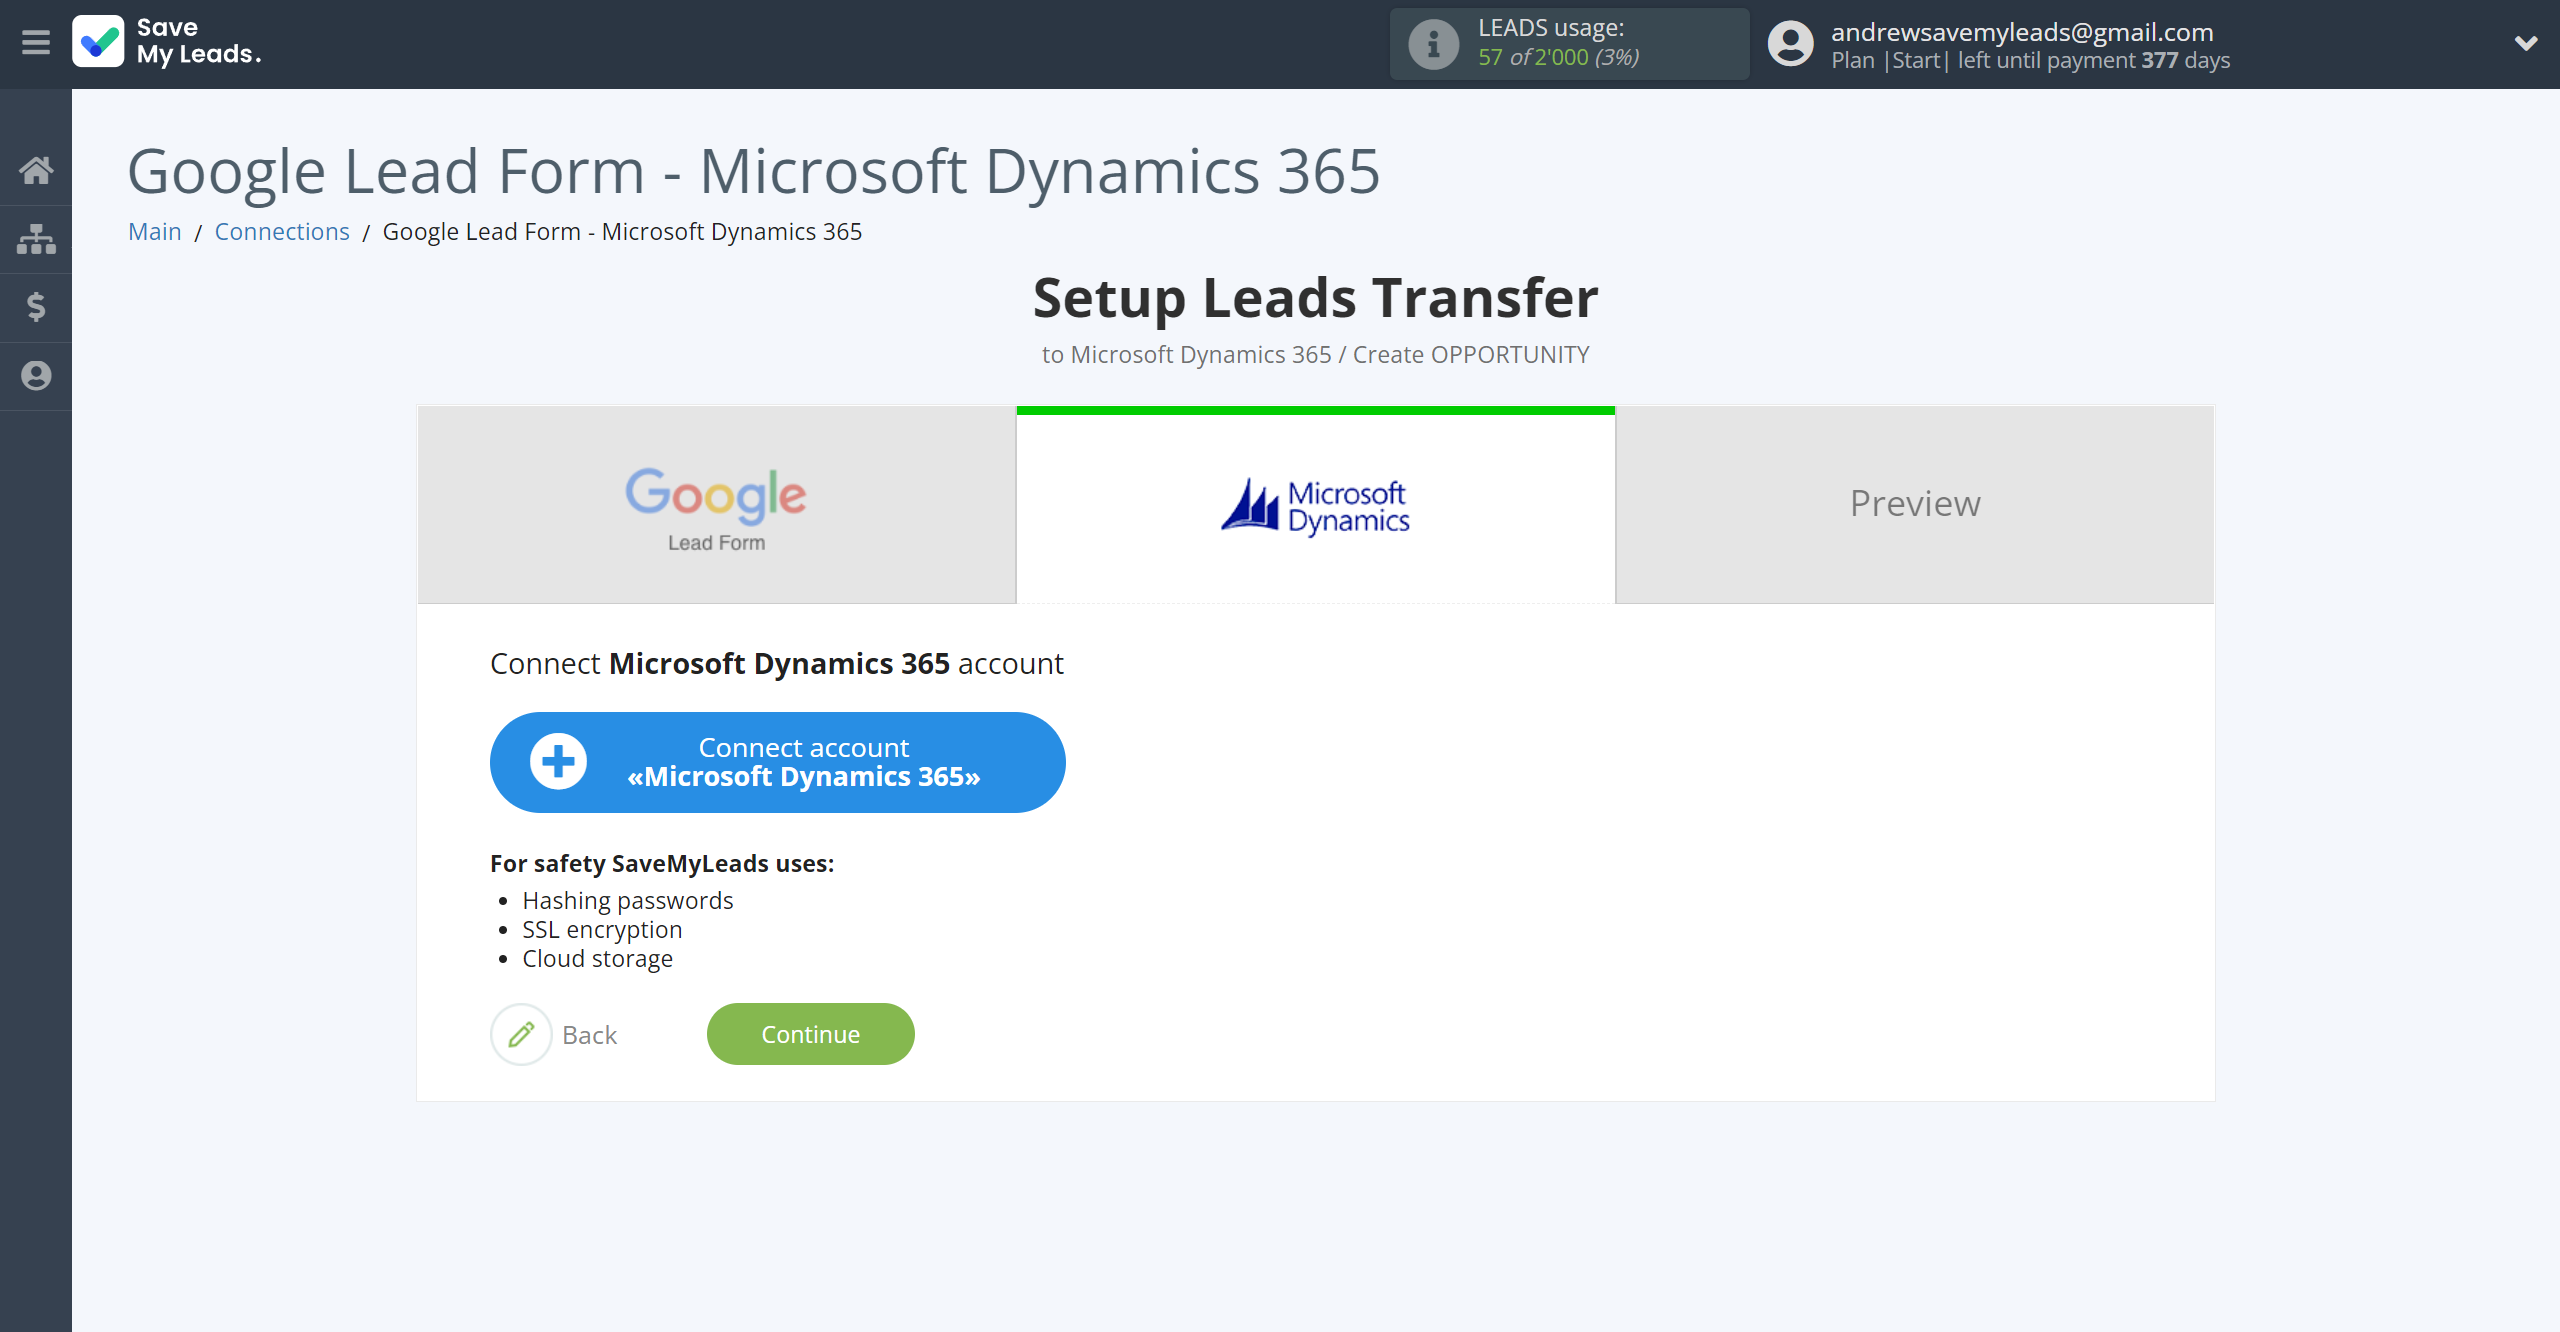 How to Connect Google Lead Form with Microsoft Dynamics 365 Create Opportunity | Data Destination account connection